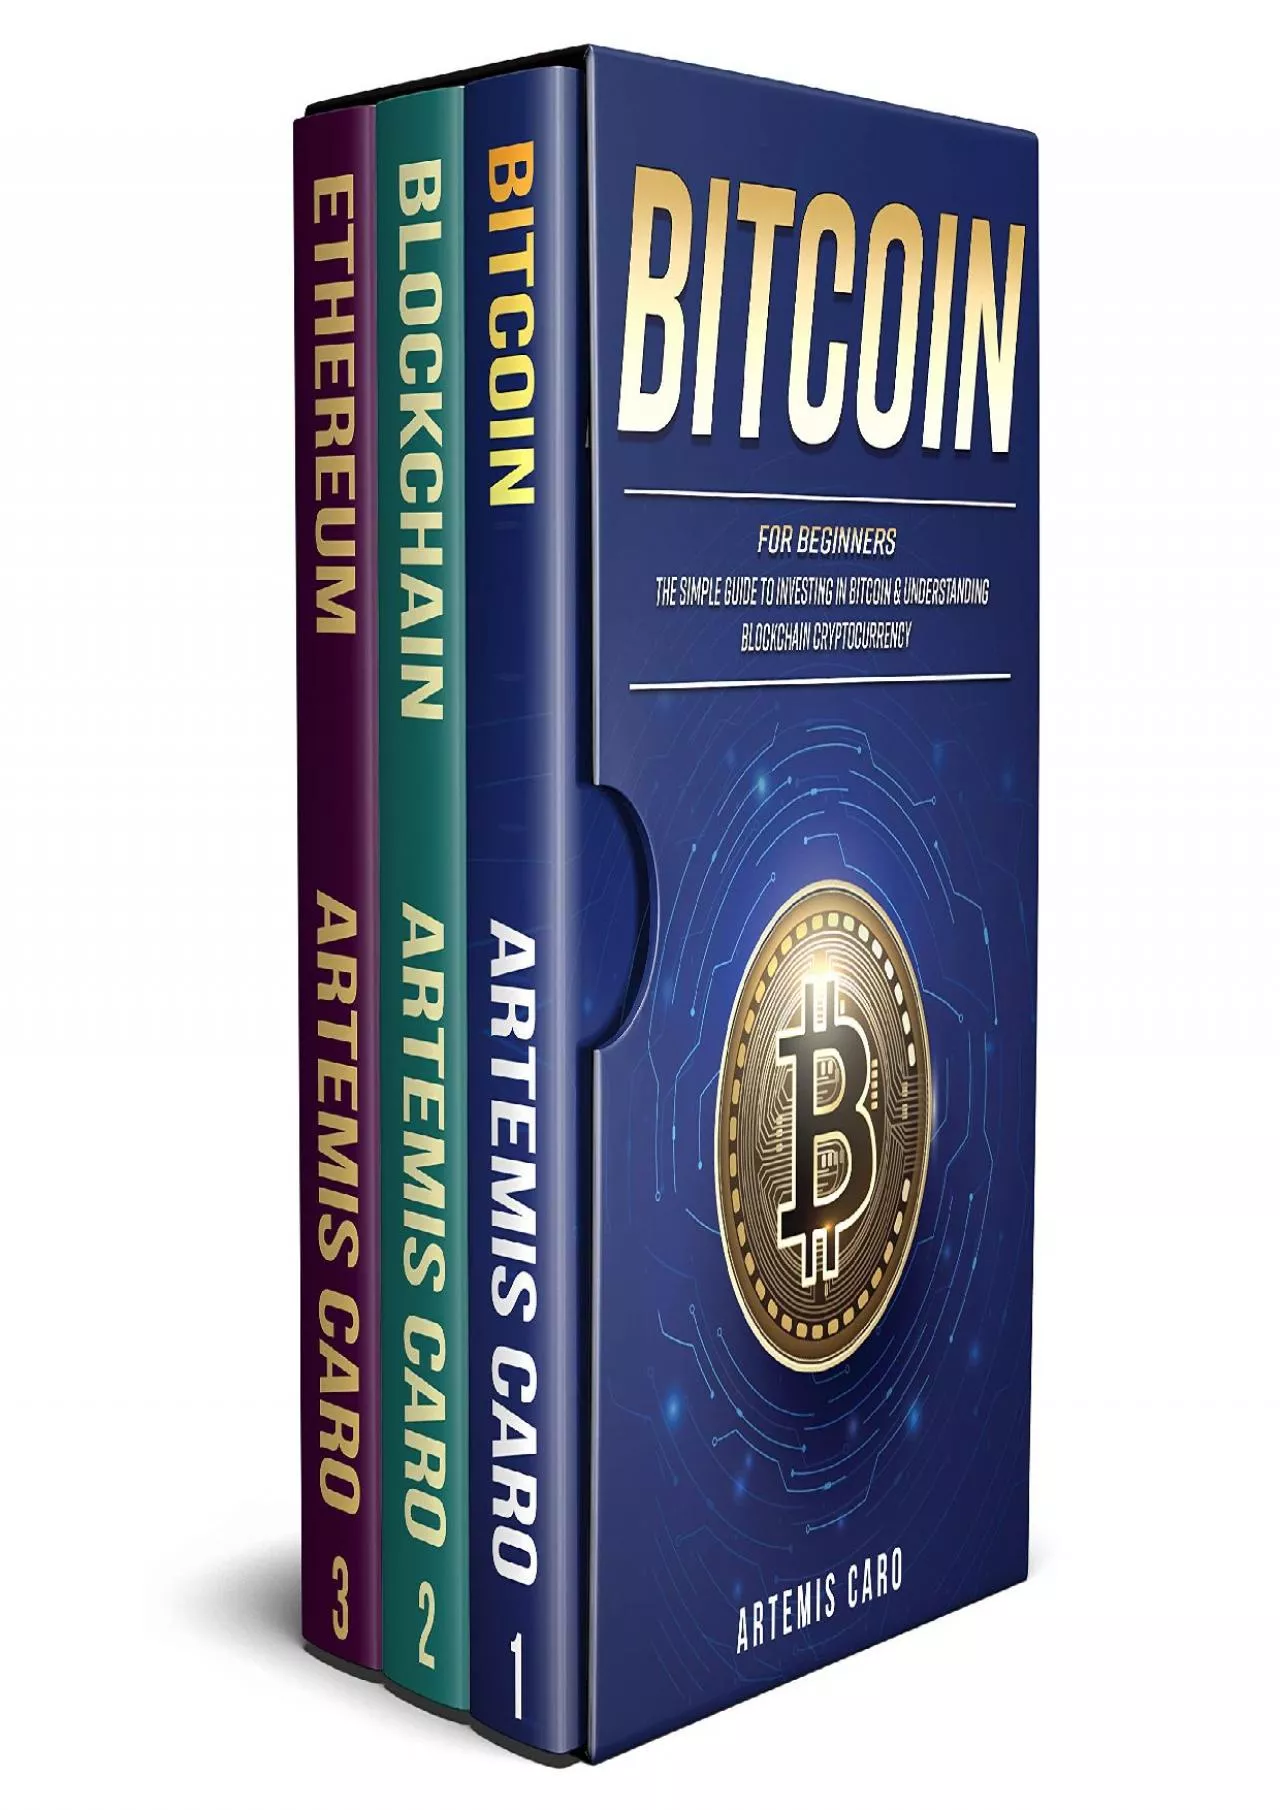 [READING BOOK]-Bitcoin for Beginners: The Simple Guide to Investing in Bitcoin  Understanding